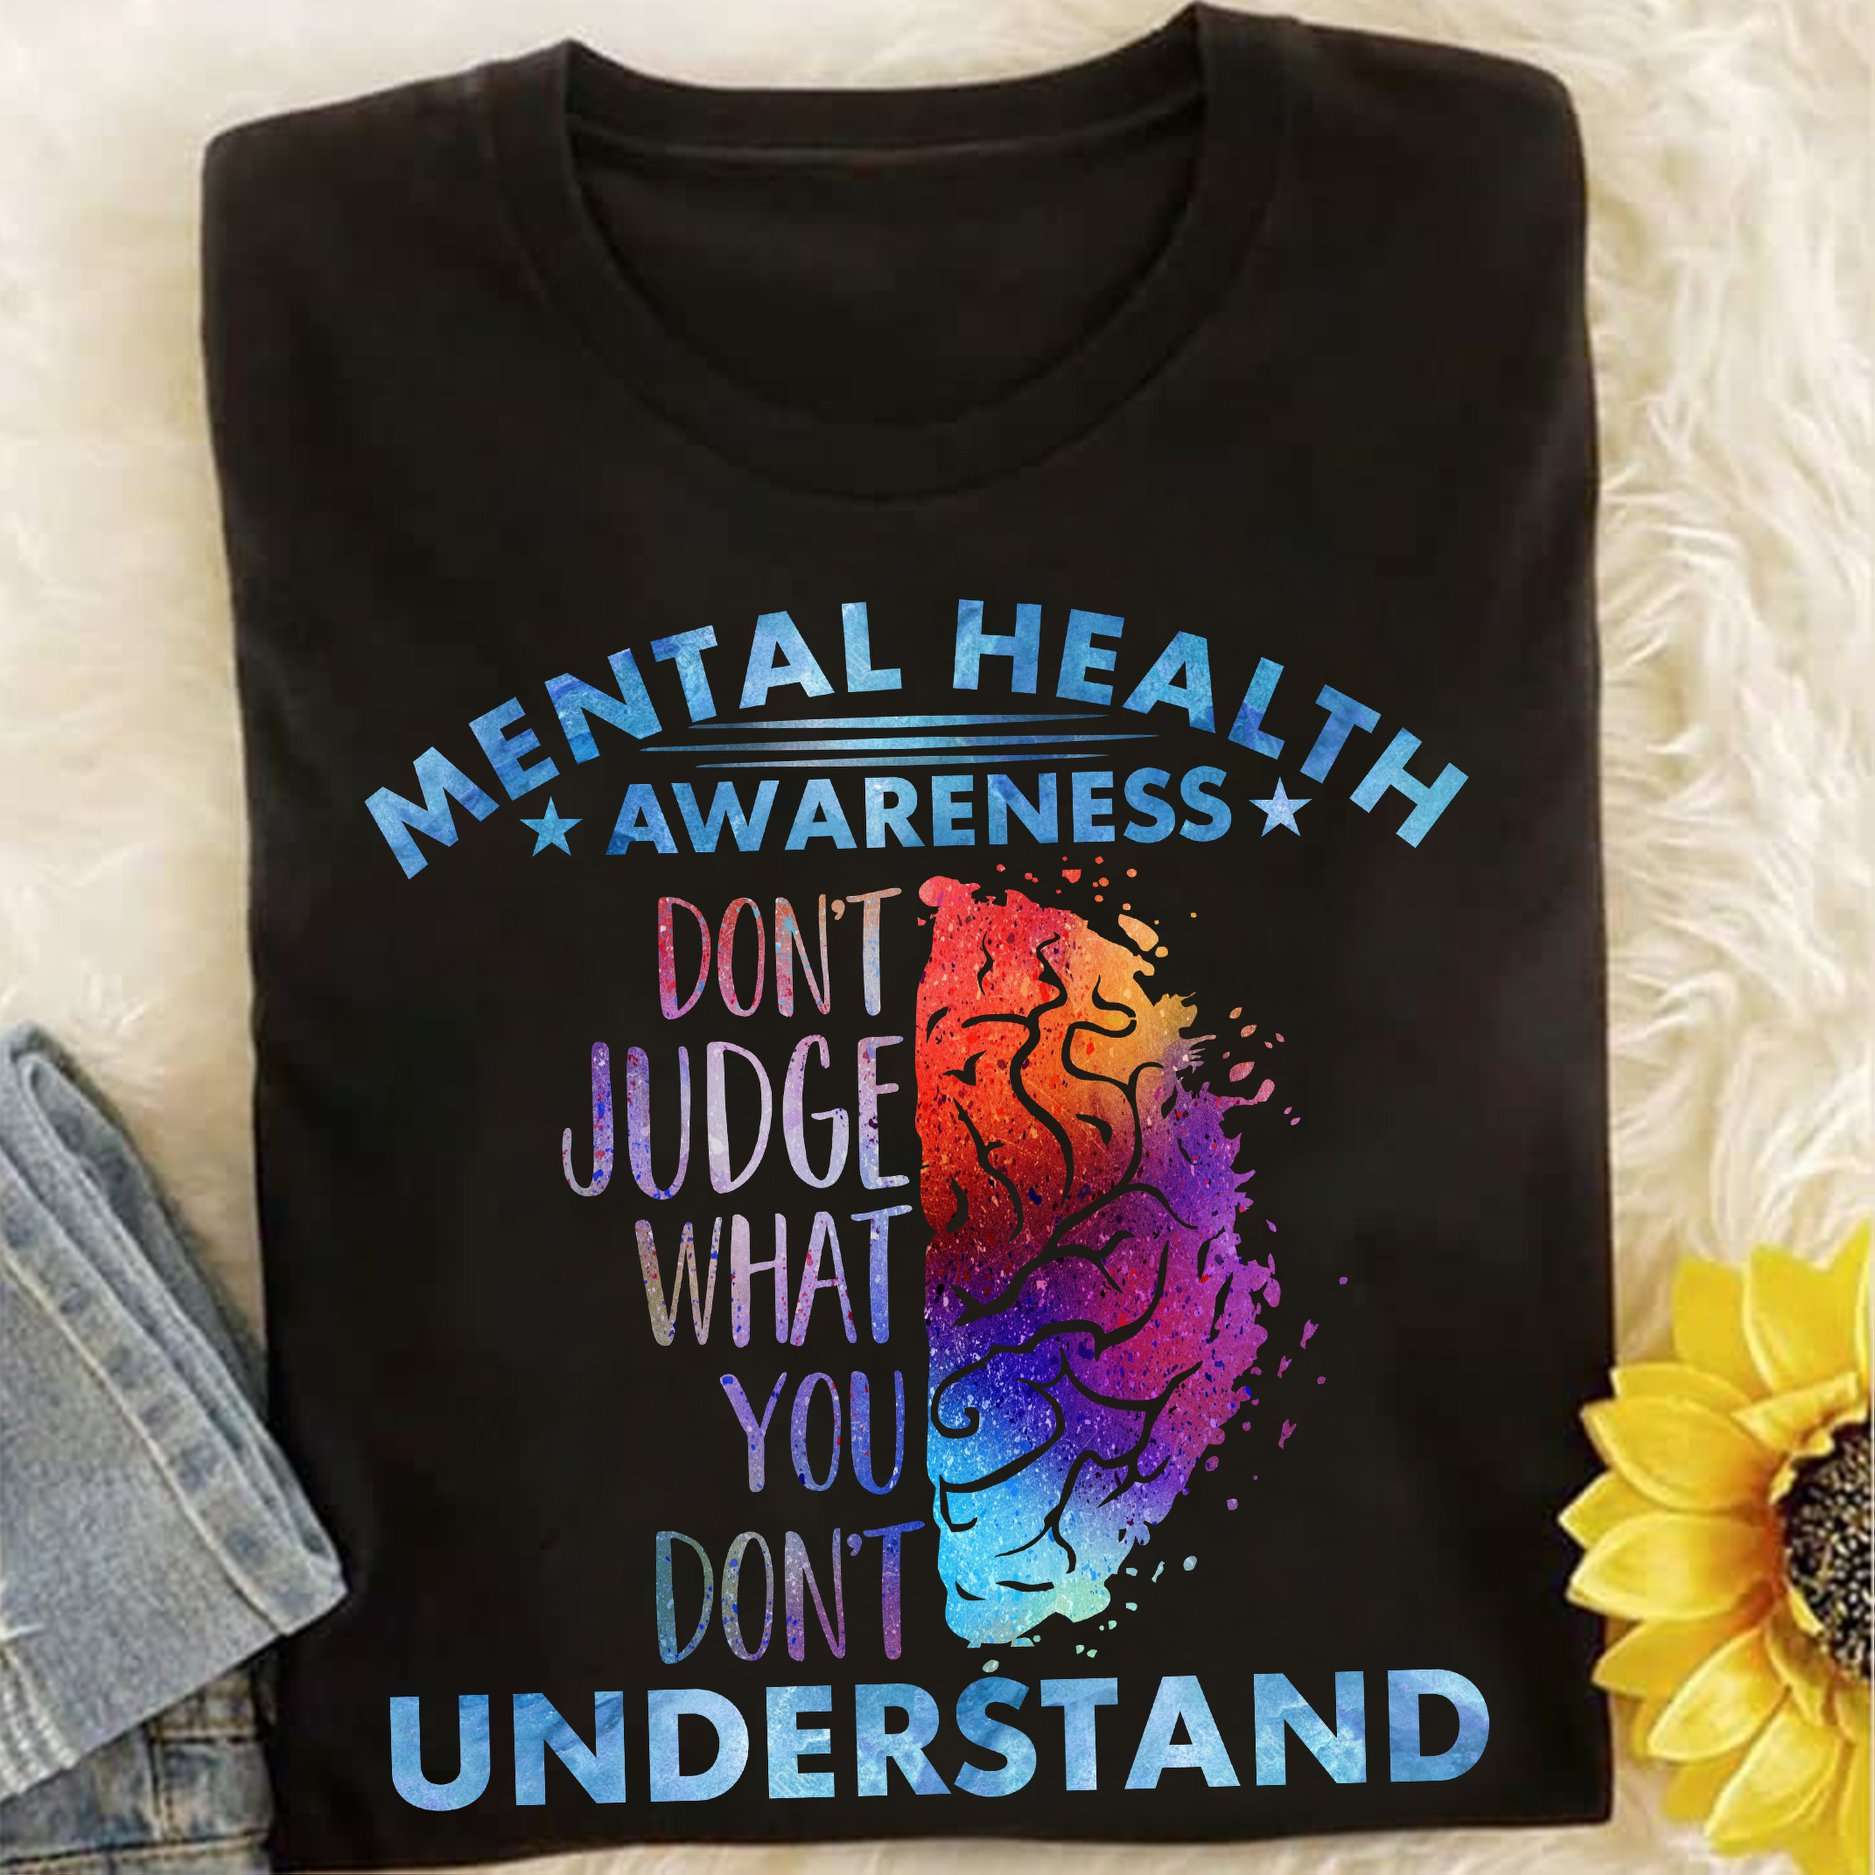 Mental Health Awareness - Don't judge what you don't understand